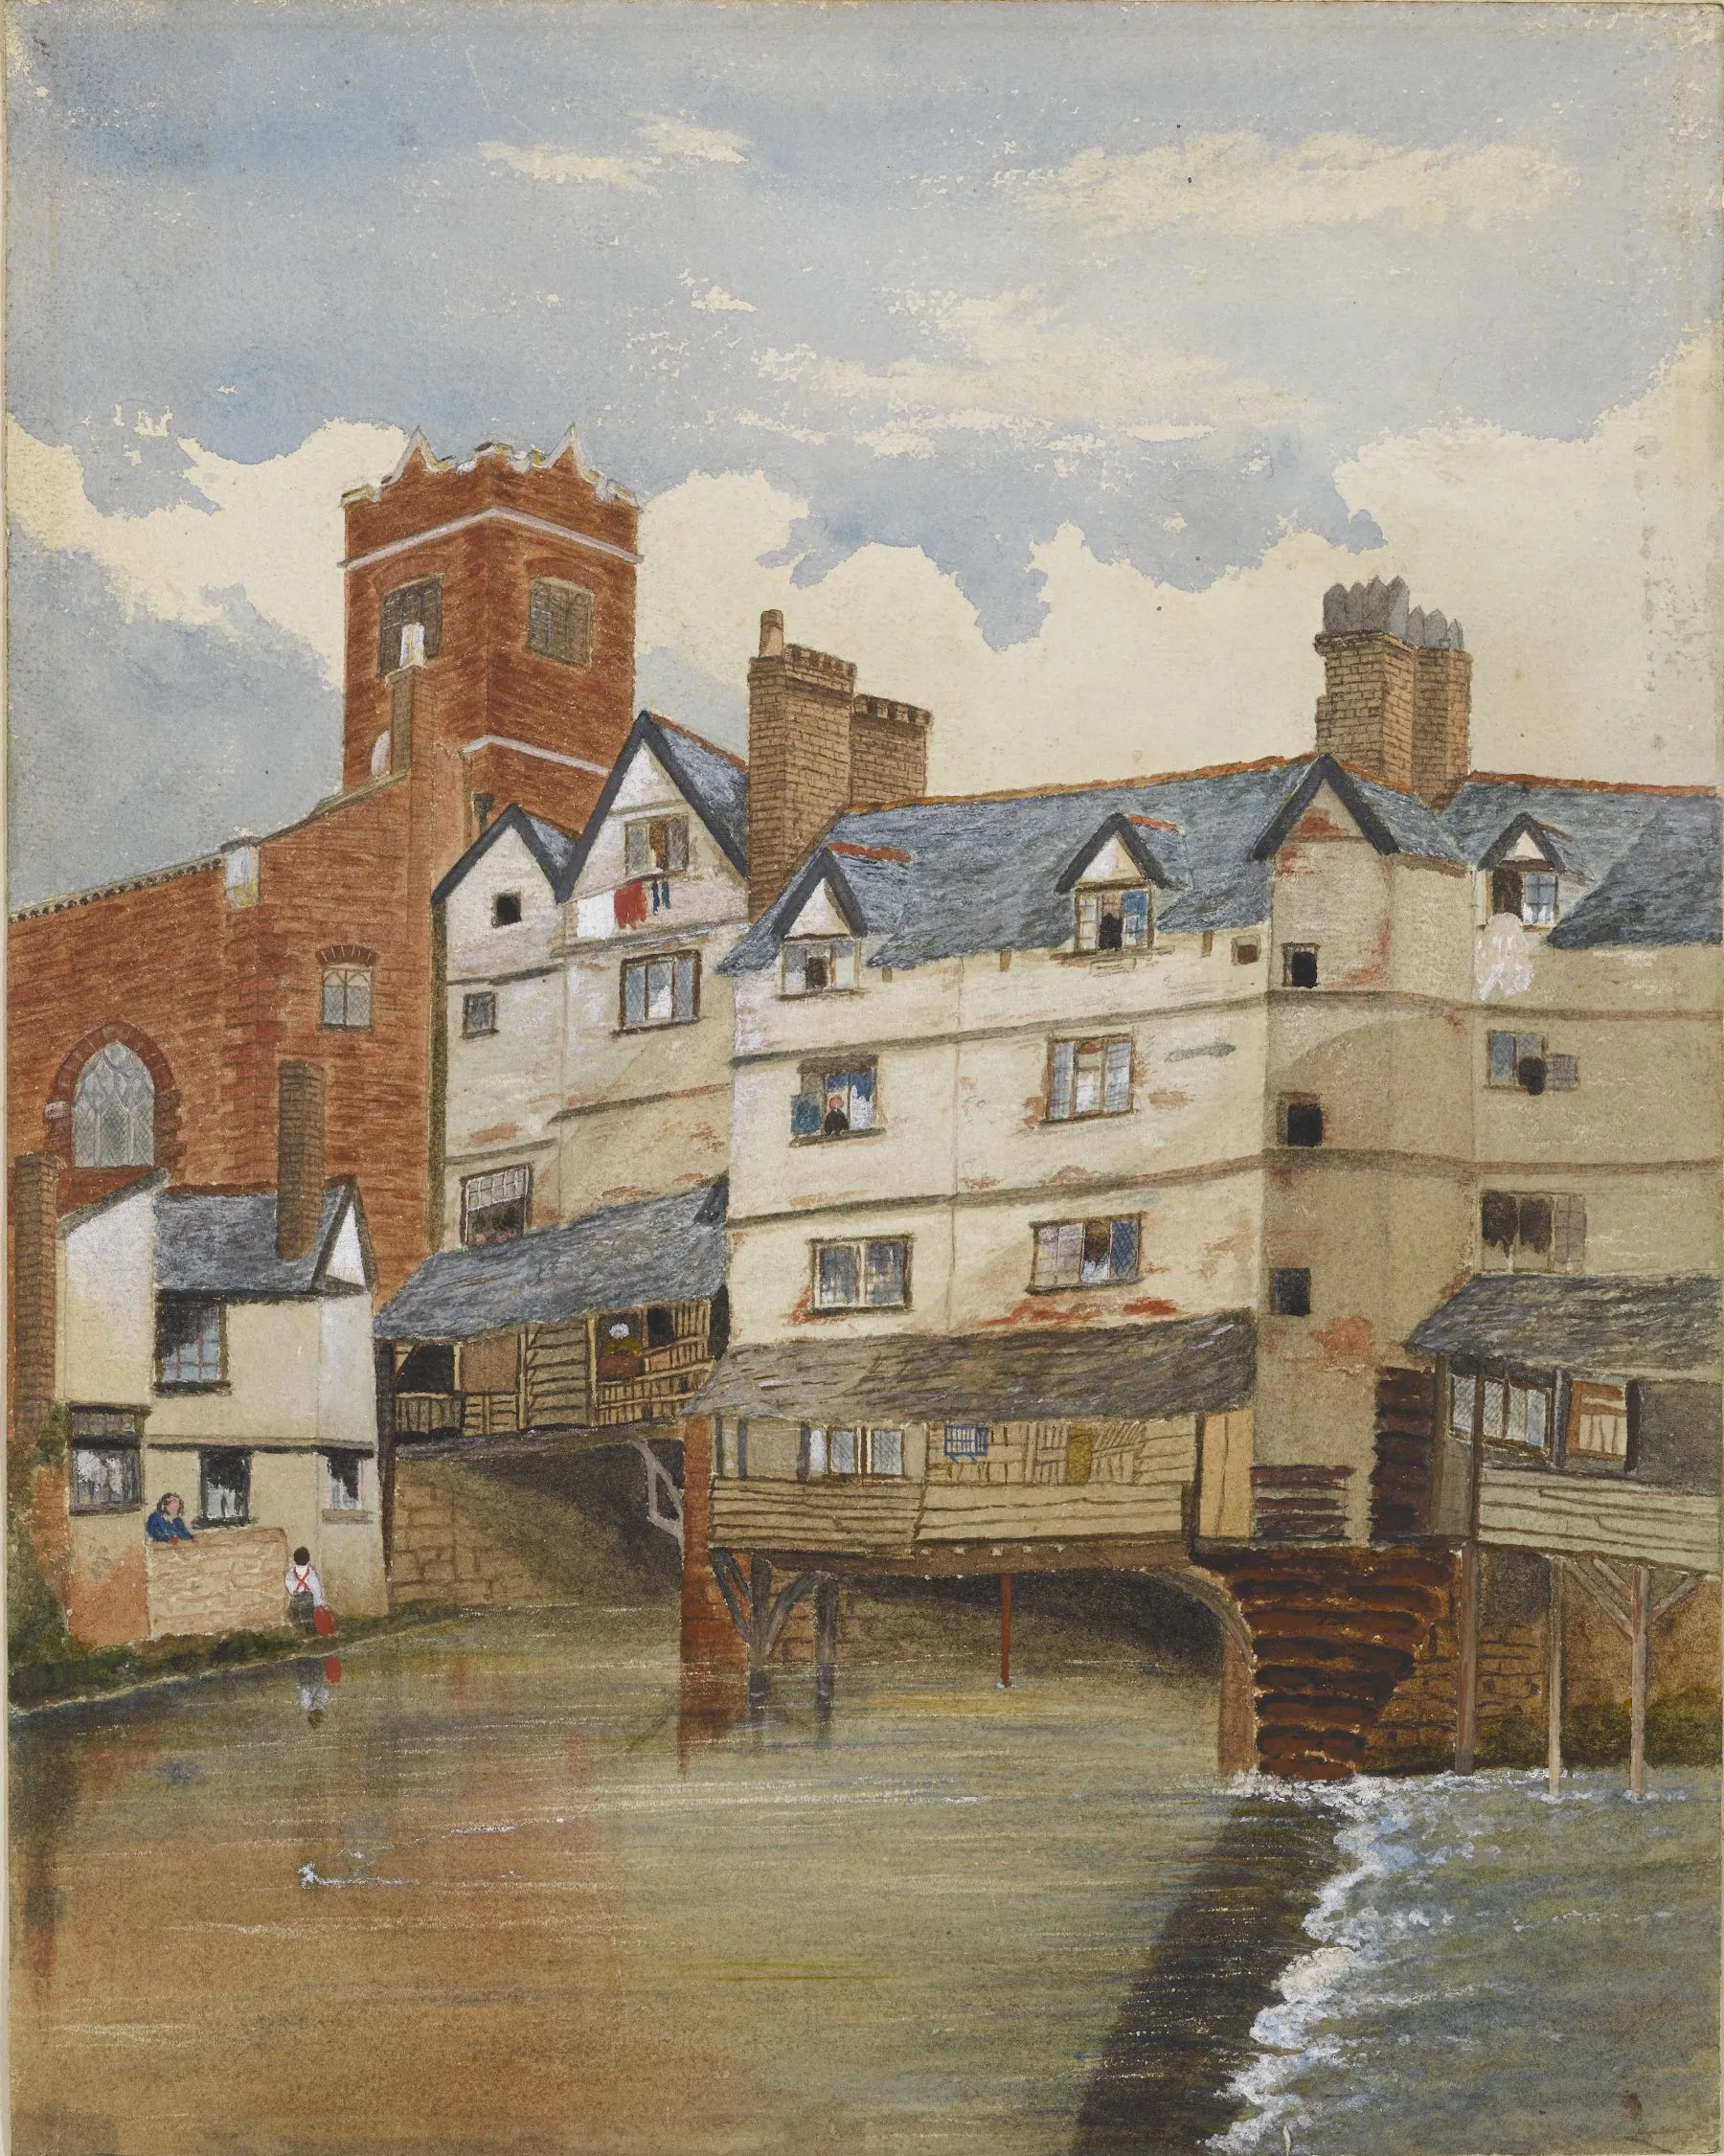 Photo showing: ‘Church of St Edmunds and Old Houses, Exeter’, English School, about 1840-1890. This watercolour on paper depicts the old houses which surround the Church of St Edmunds in Exeter. The old houses have since been demolished, approximately around 1870.

St Edmunds Church, located near the old Exe Bridge, was first constructed in 870. It is also believed that Exeter’s first printing press was installed in the church in the 1500’s. With the re-development of Exeter’s Exe bridge area, the church was partly demolished, but the excavation of the old Exe Bridge led to the stabilisation of the Church tower, which still remains today.